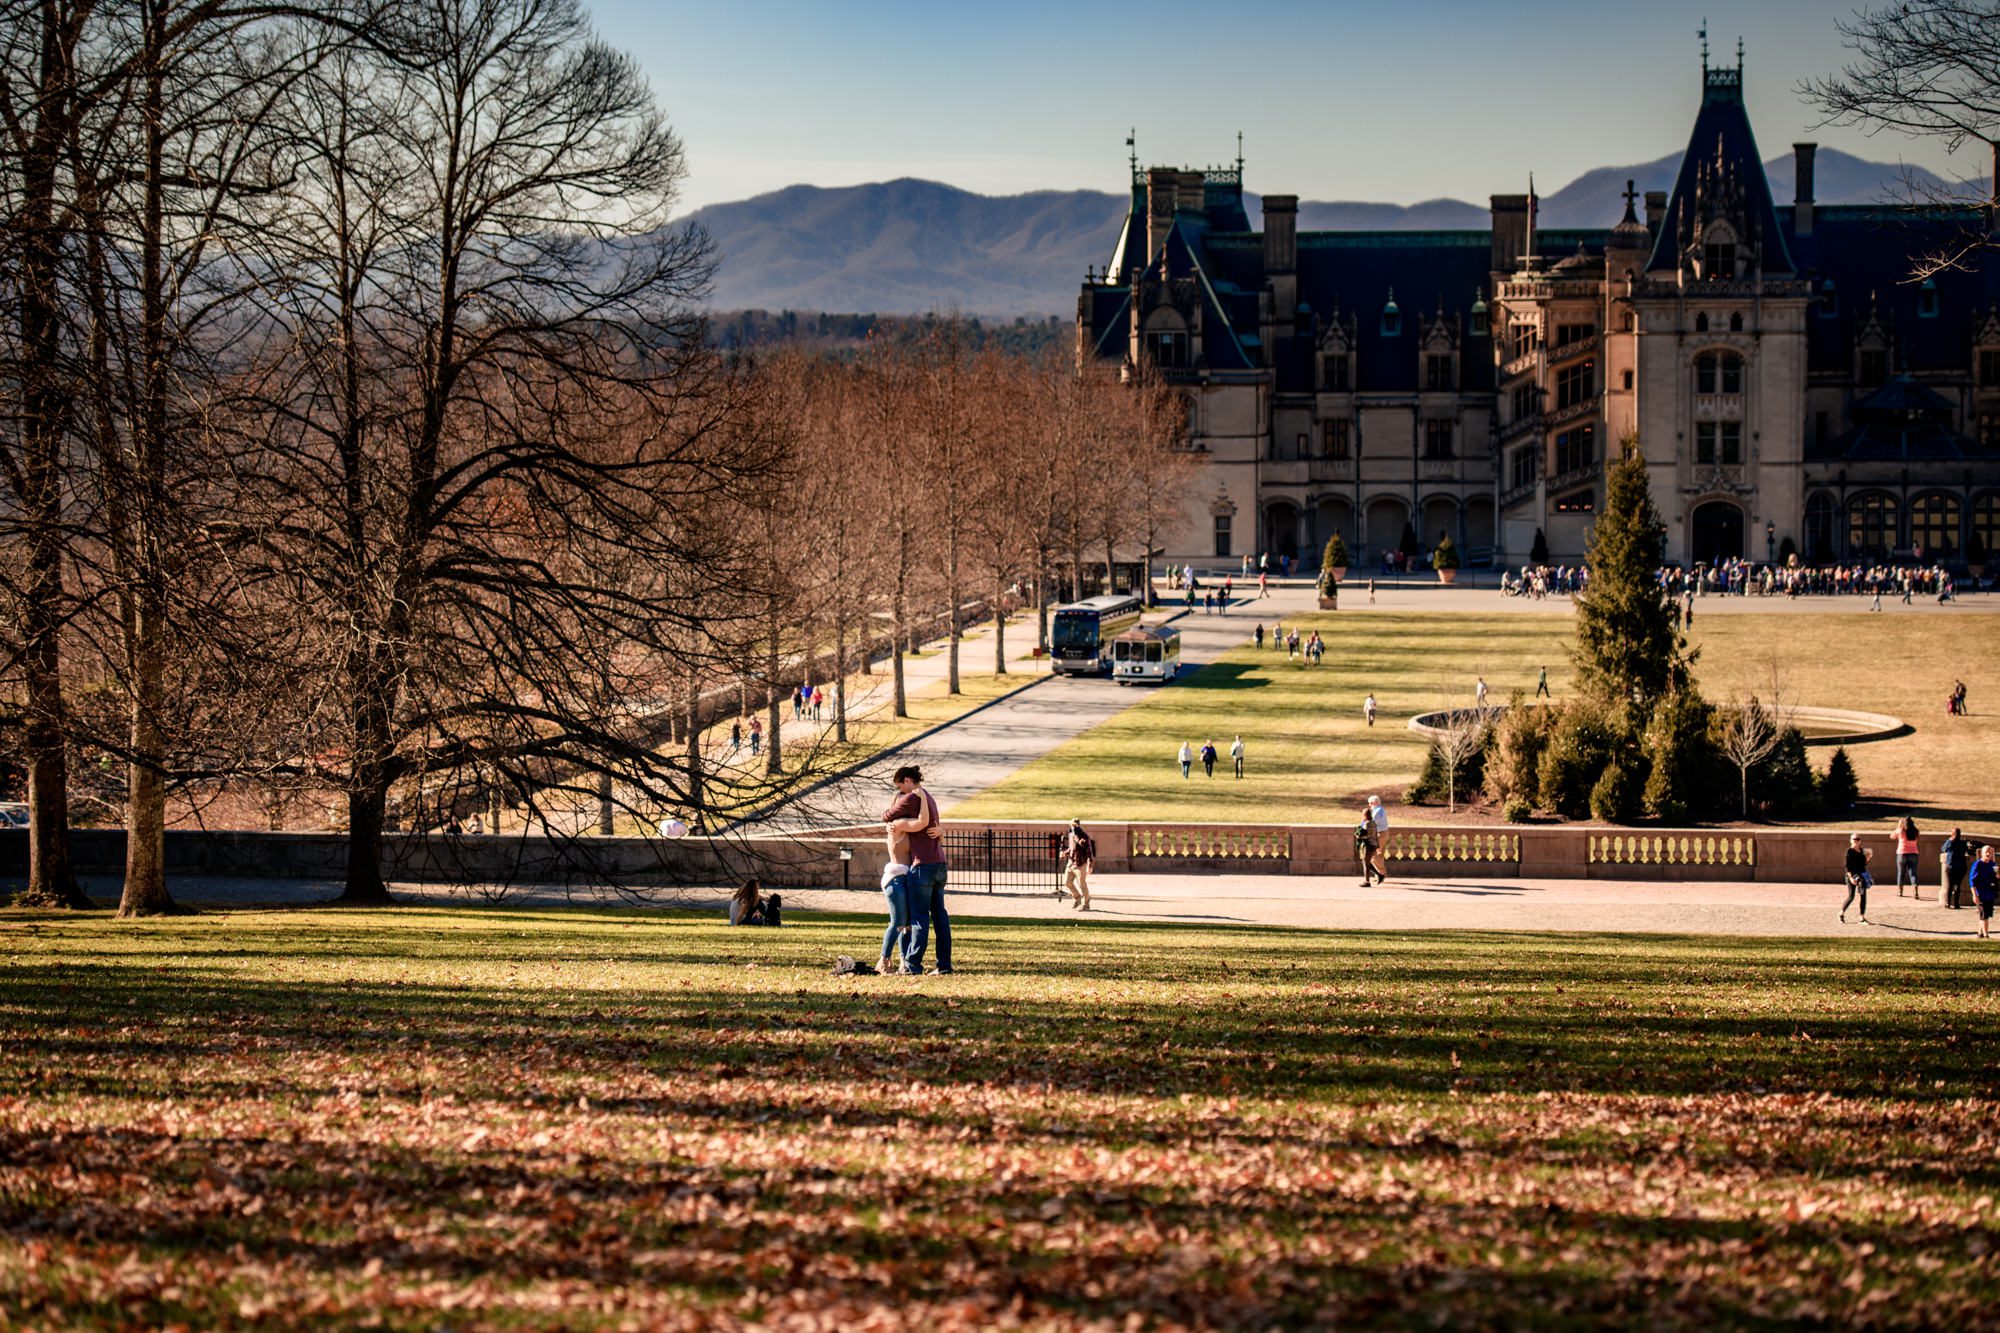 The couple sharing a tender kiss post-proposal, with the historic Biltmore mansion looming majestically in the background